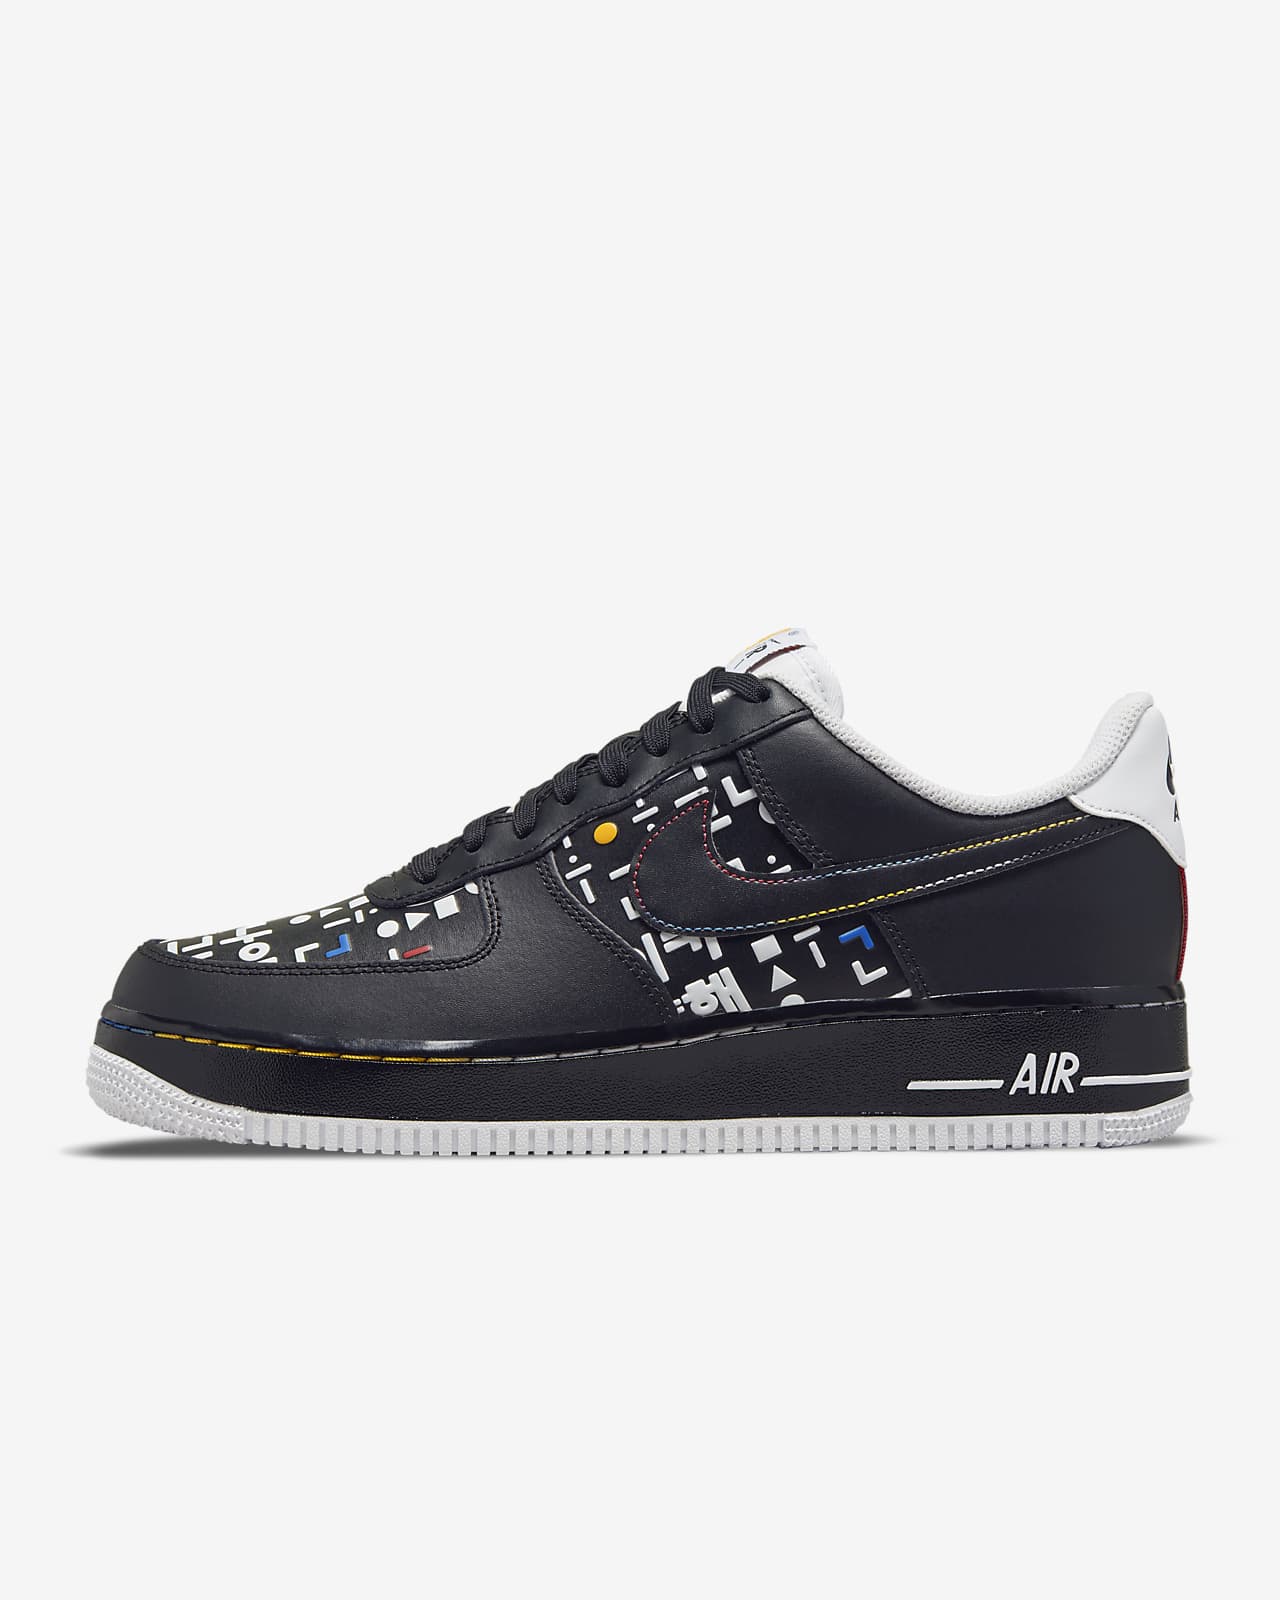 Nike Air Force 1 '07 LV8 Men's Shoes